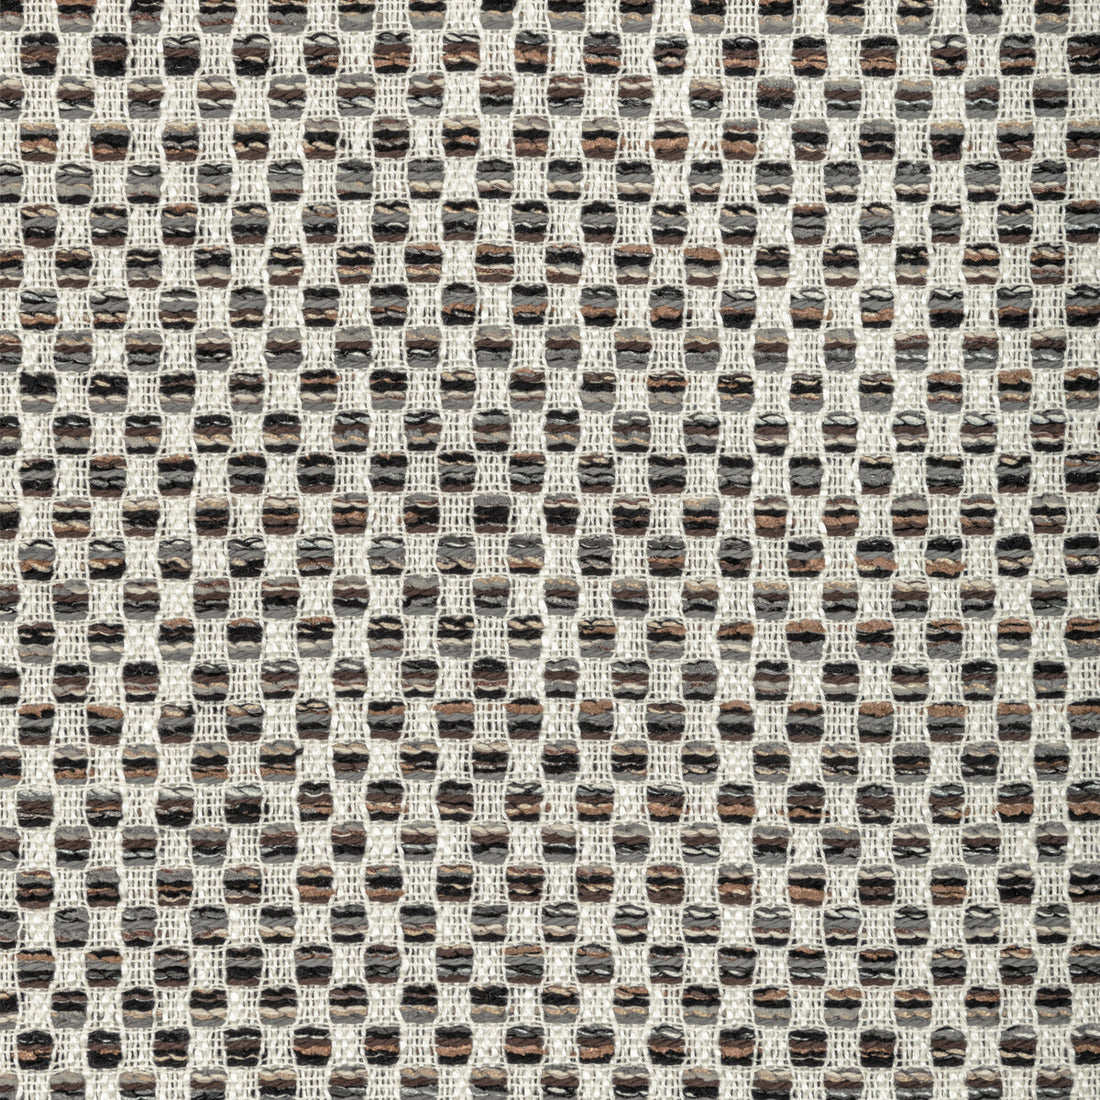 Kravet Design fabric in 36410-86 color - pattern 36410.86.0 - by Kravet Design in the Performance Crypton Home collection